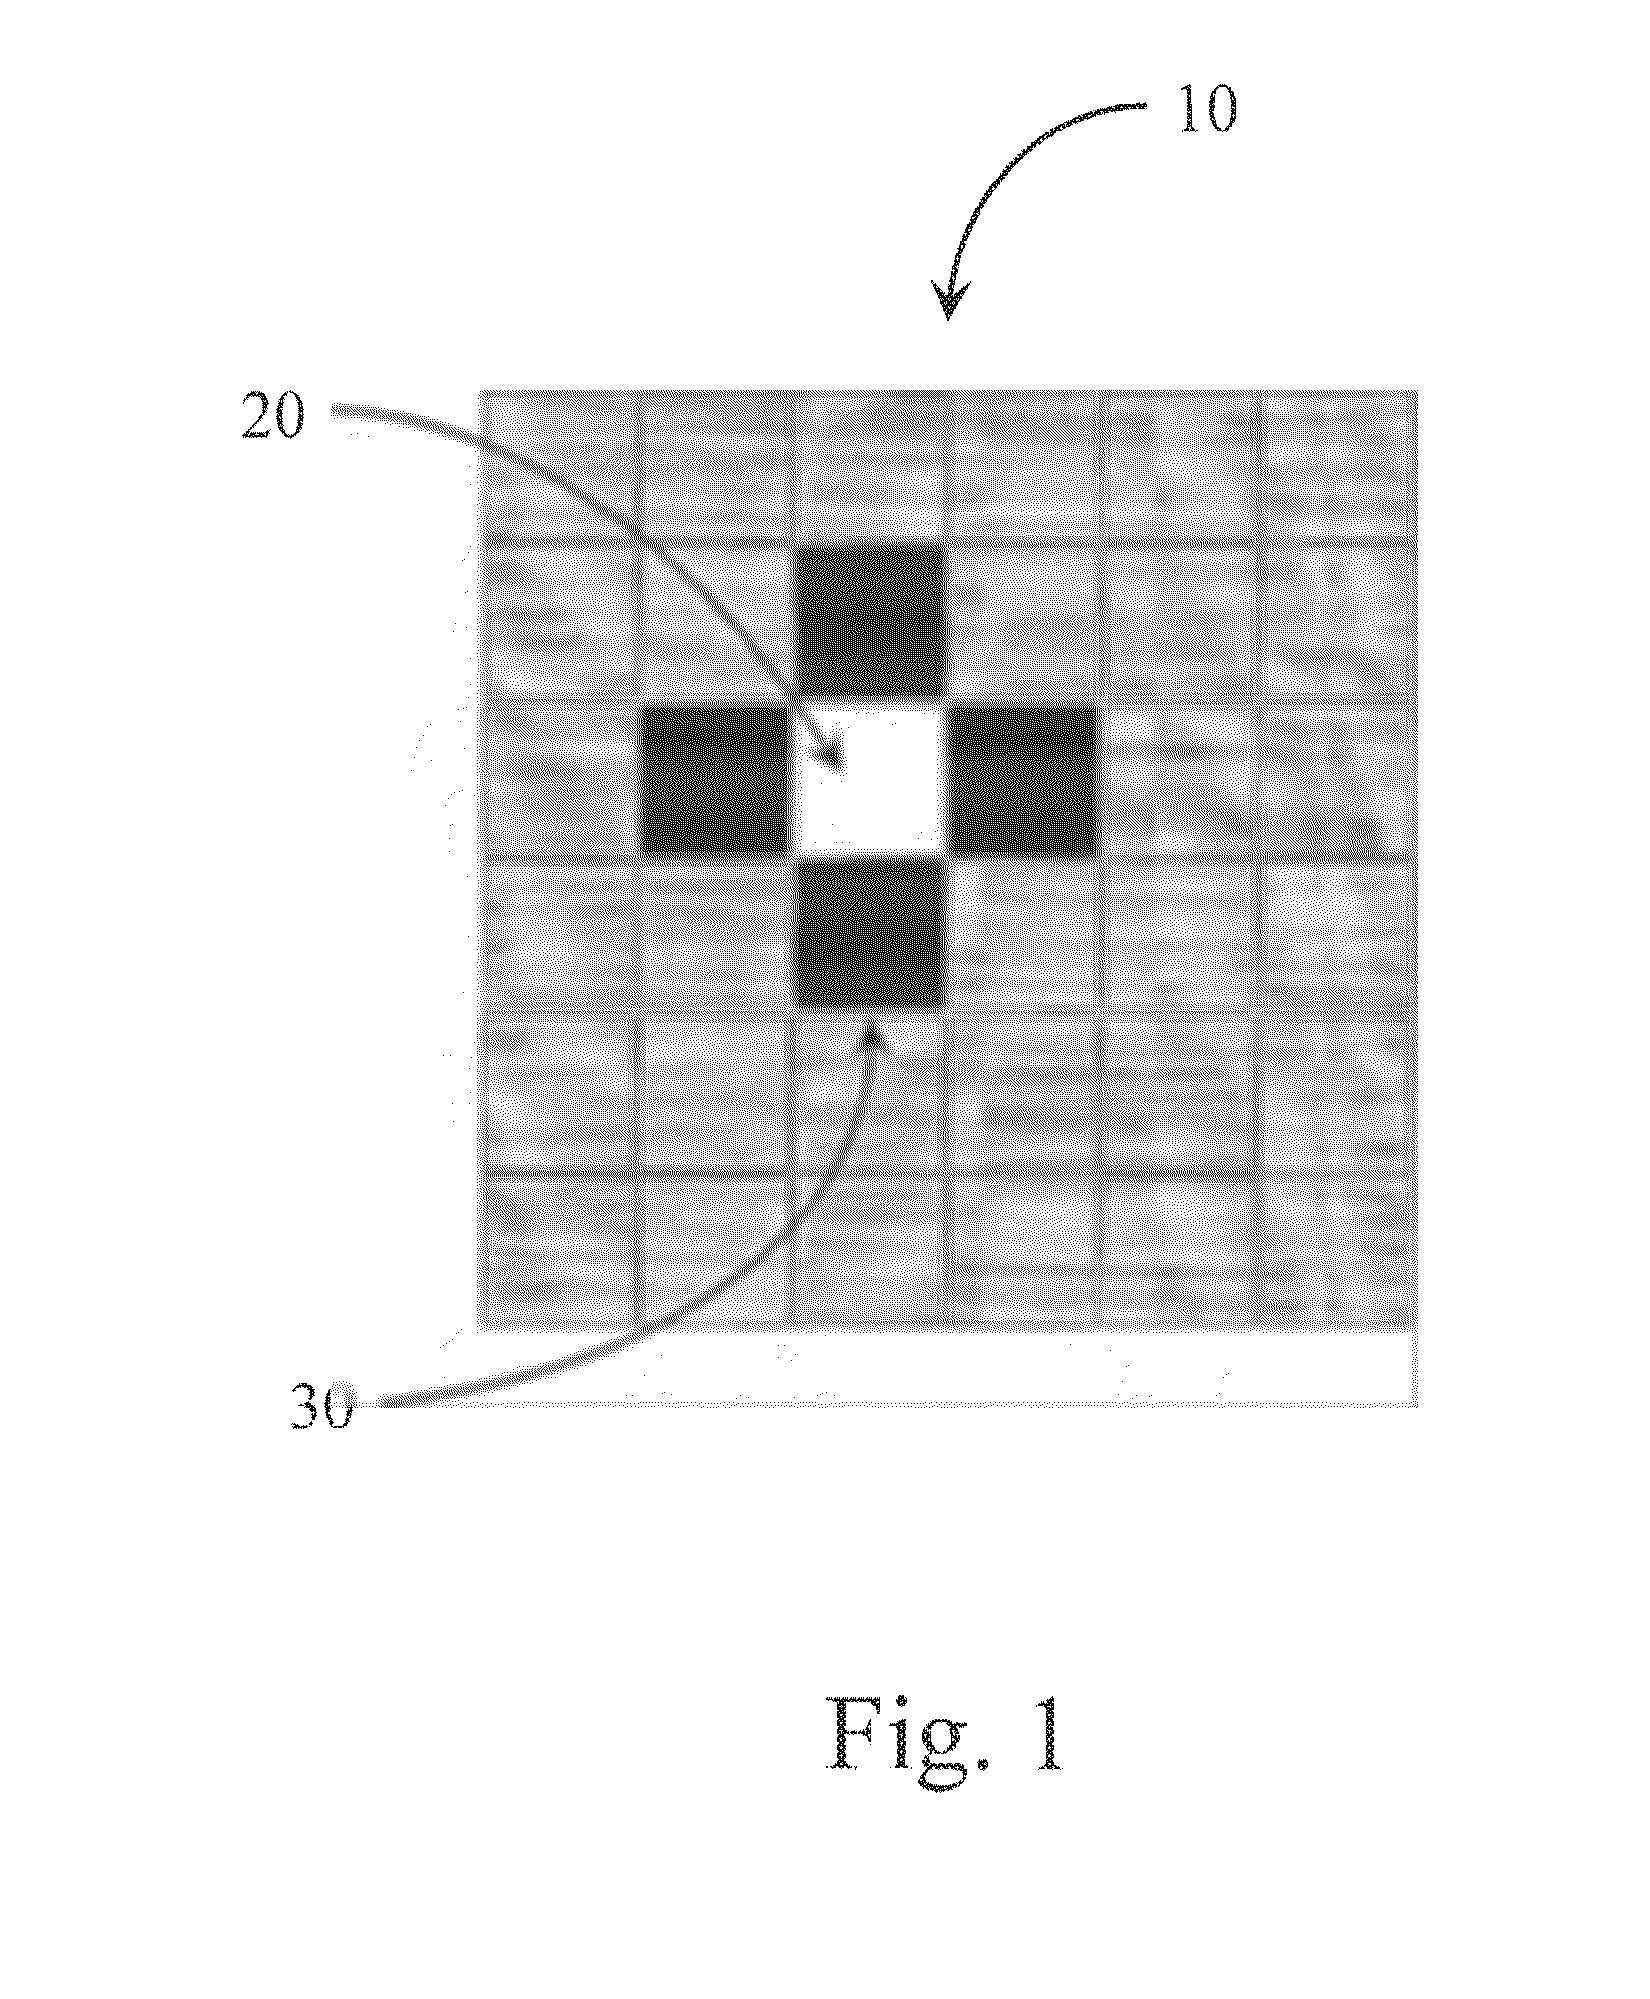 Method, Apparatus and Computer Program Product for Automatically Generating a Computer Program Using Consume, Simplify and Produce Semantics with Normalize, Transpose and Distribute Operations